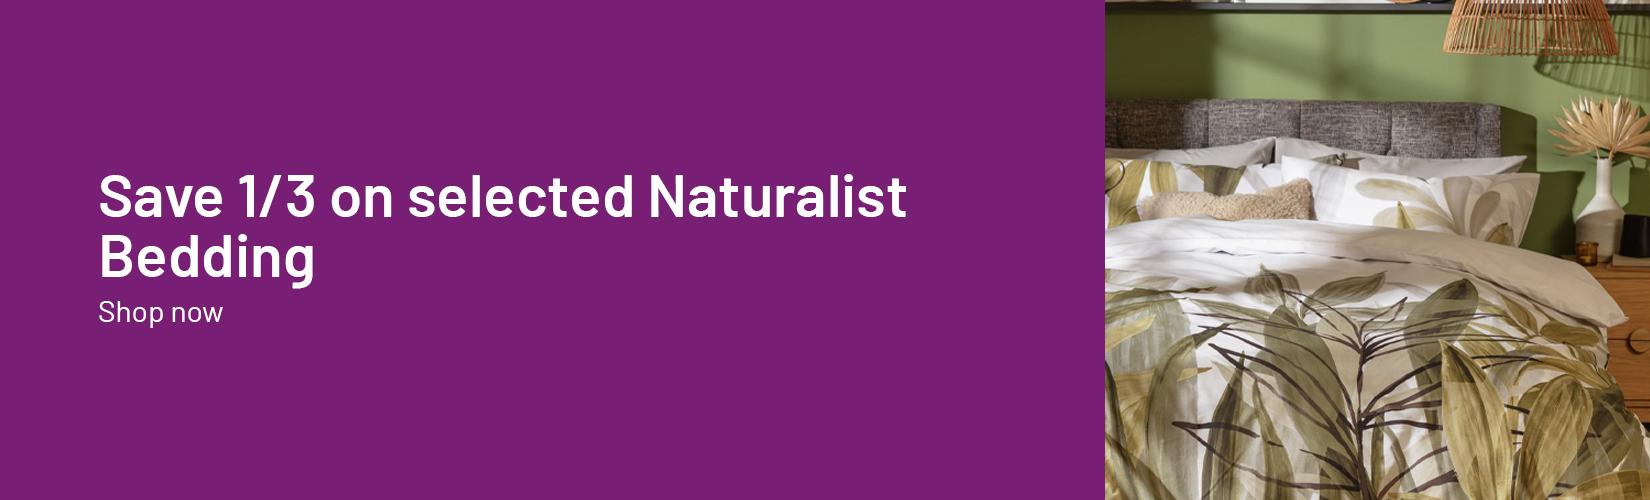 Save 1/3 on selected naturalist bedding.